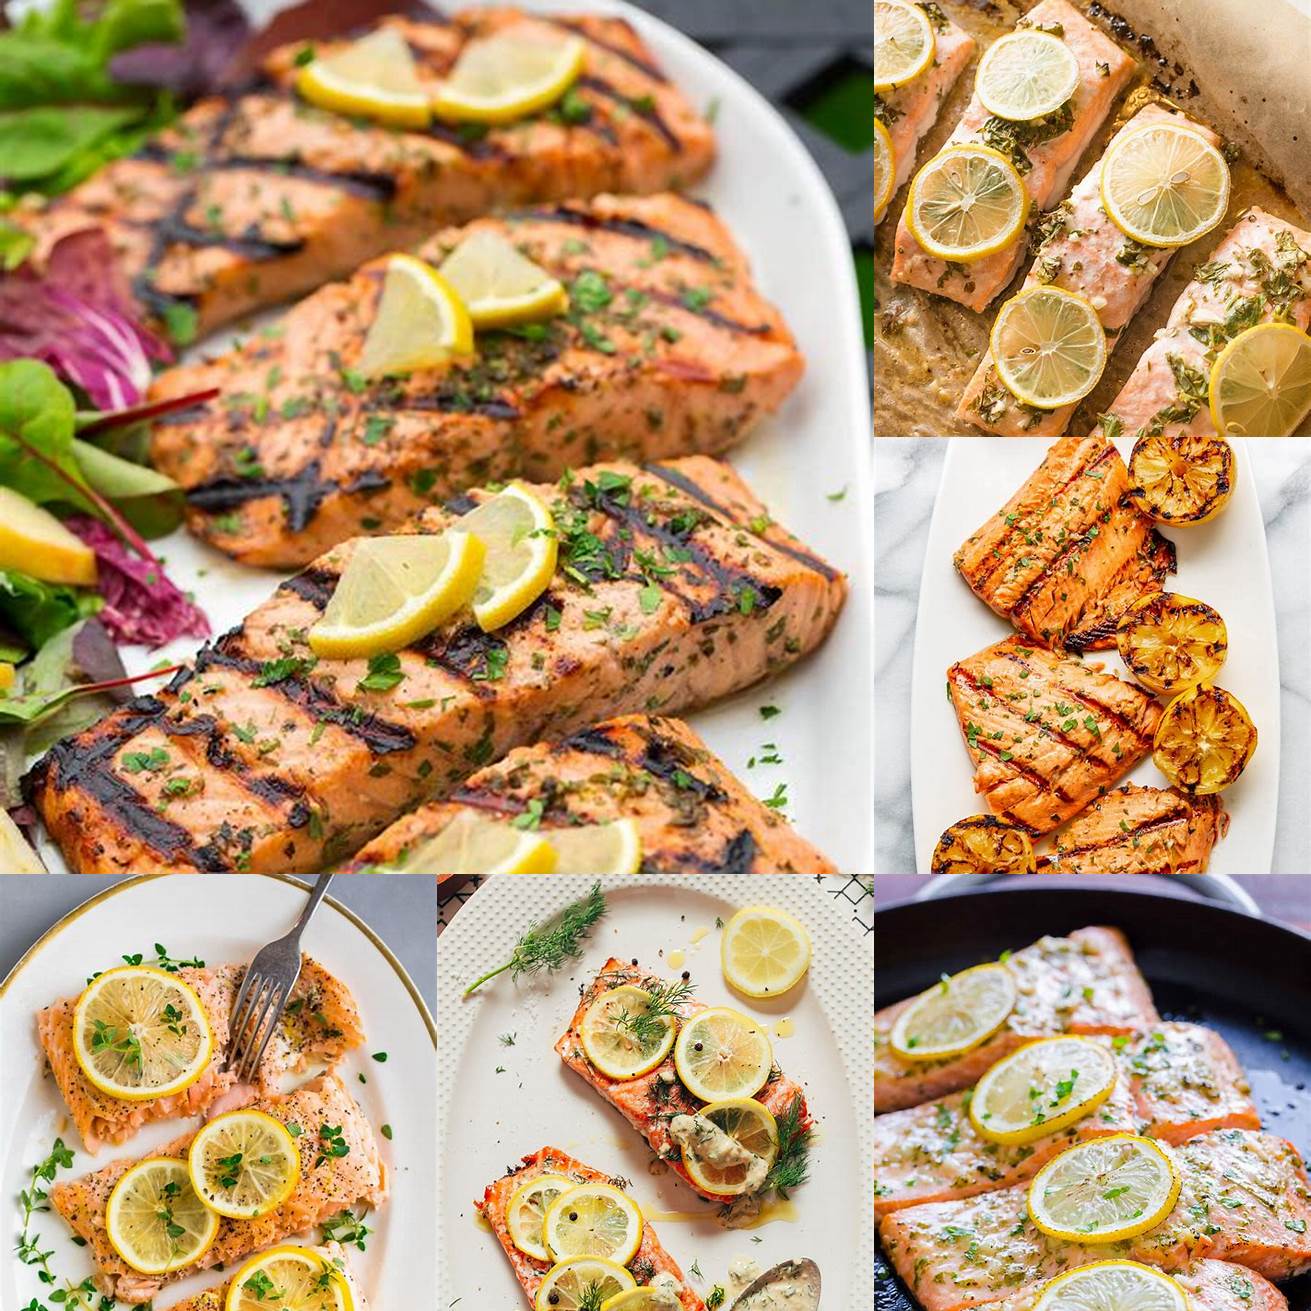 Grilled salmon with lemon and herbs